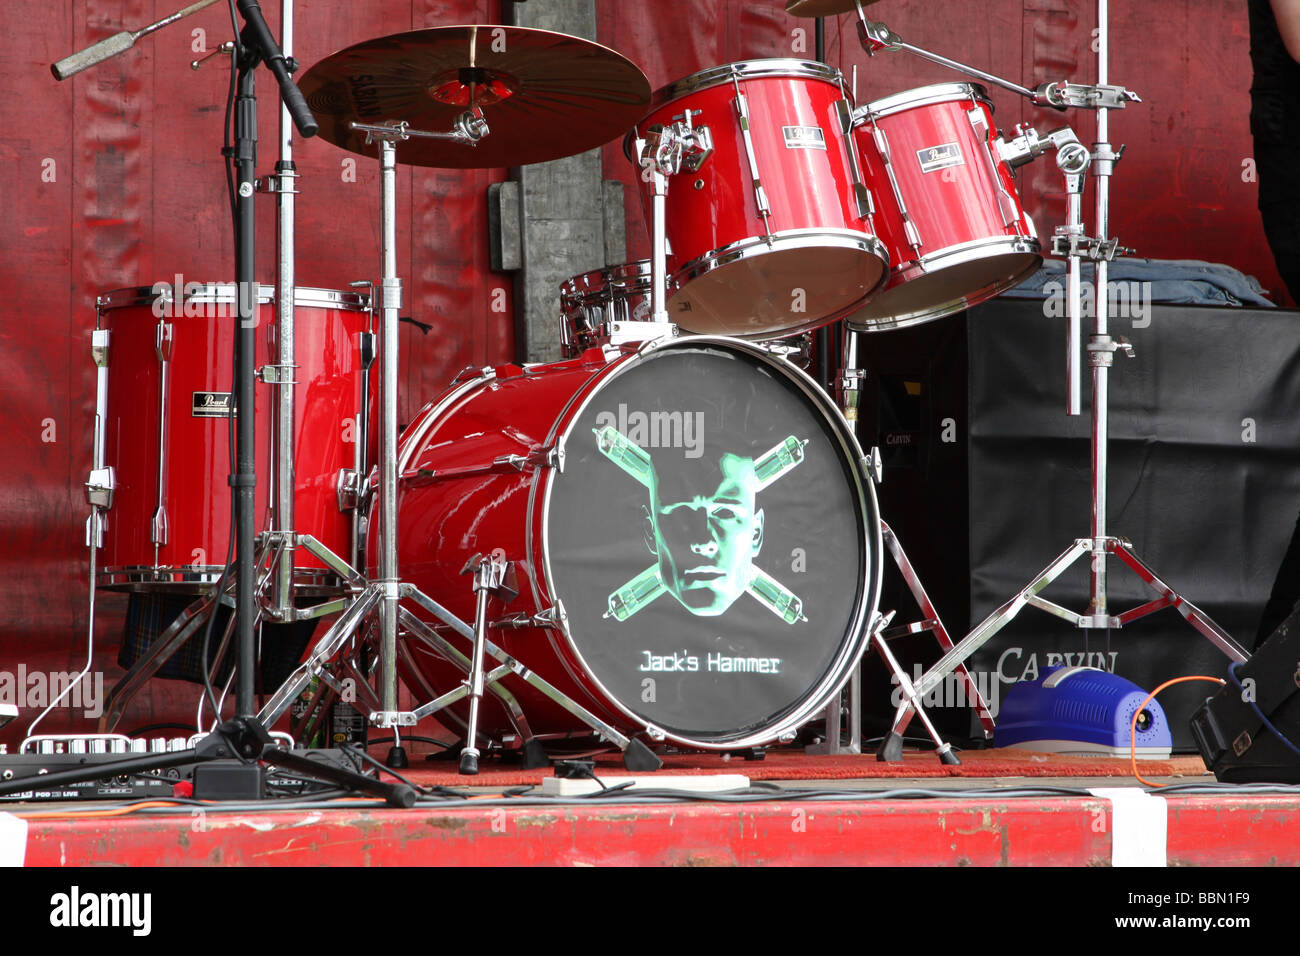 Red drum kit with a skull and crossbones type face painted on the bass drum Stock Photo